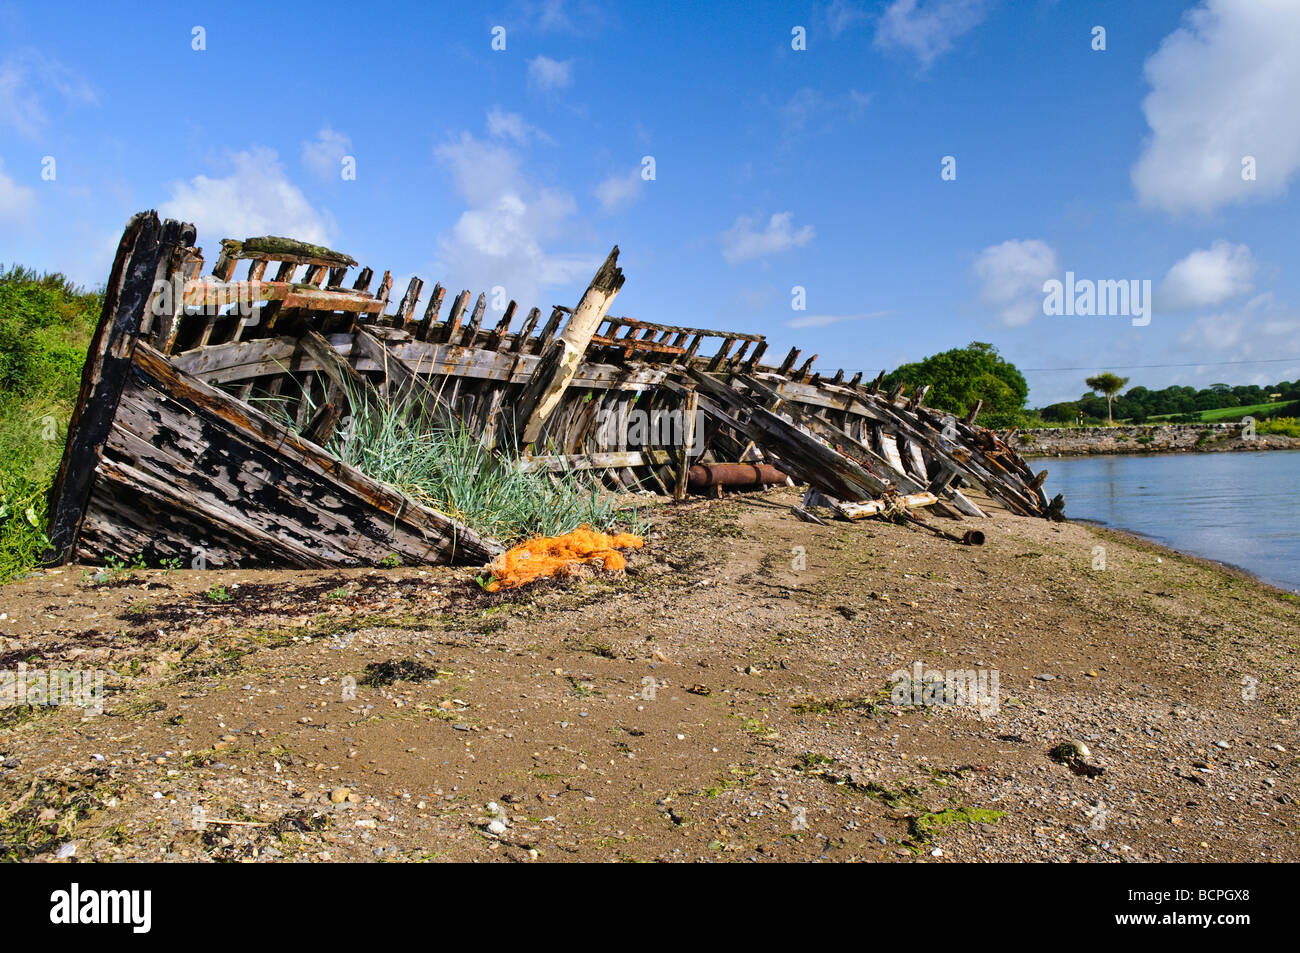 Shipwreck of a fishing boat on a beach in Wexford Ireland. Stock Photo